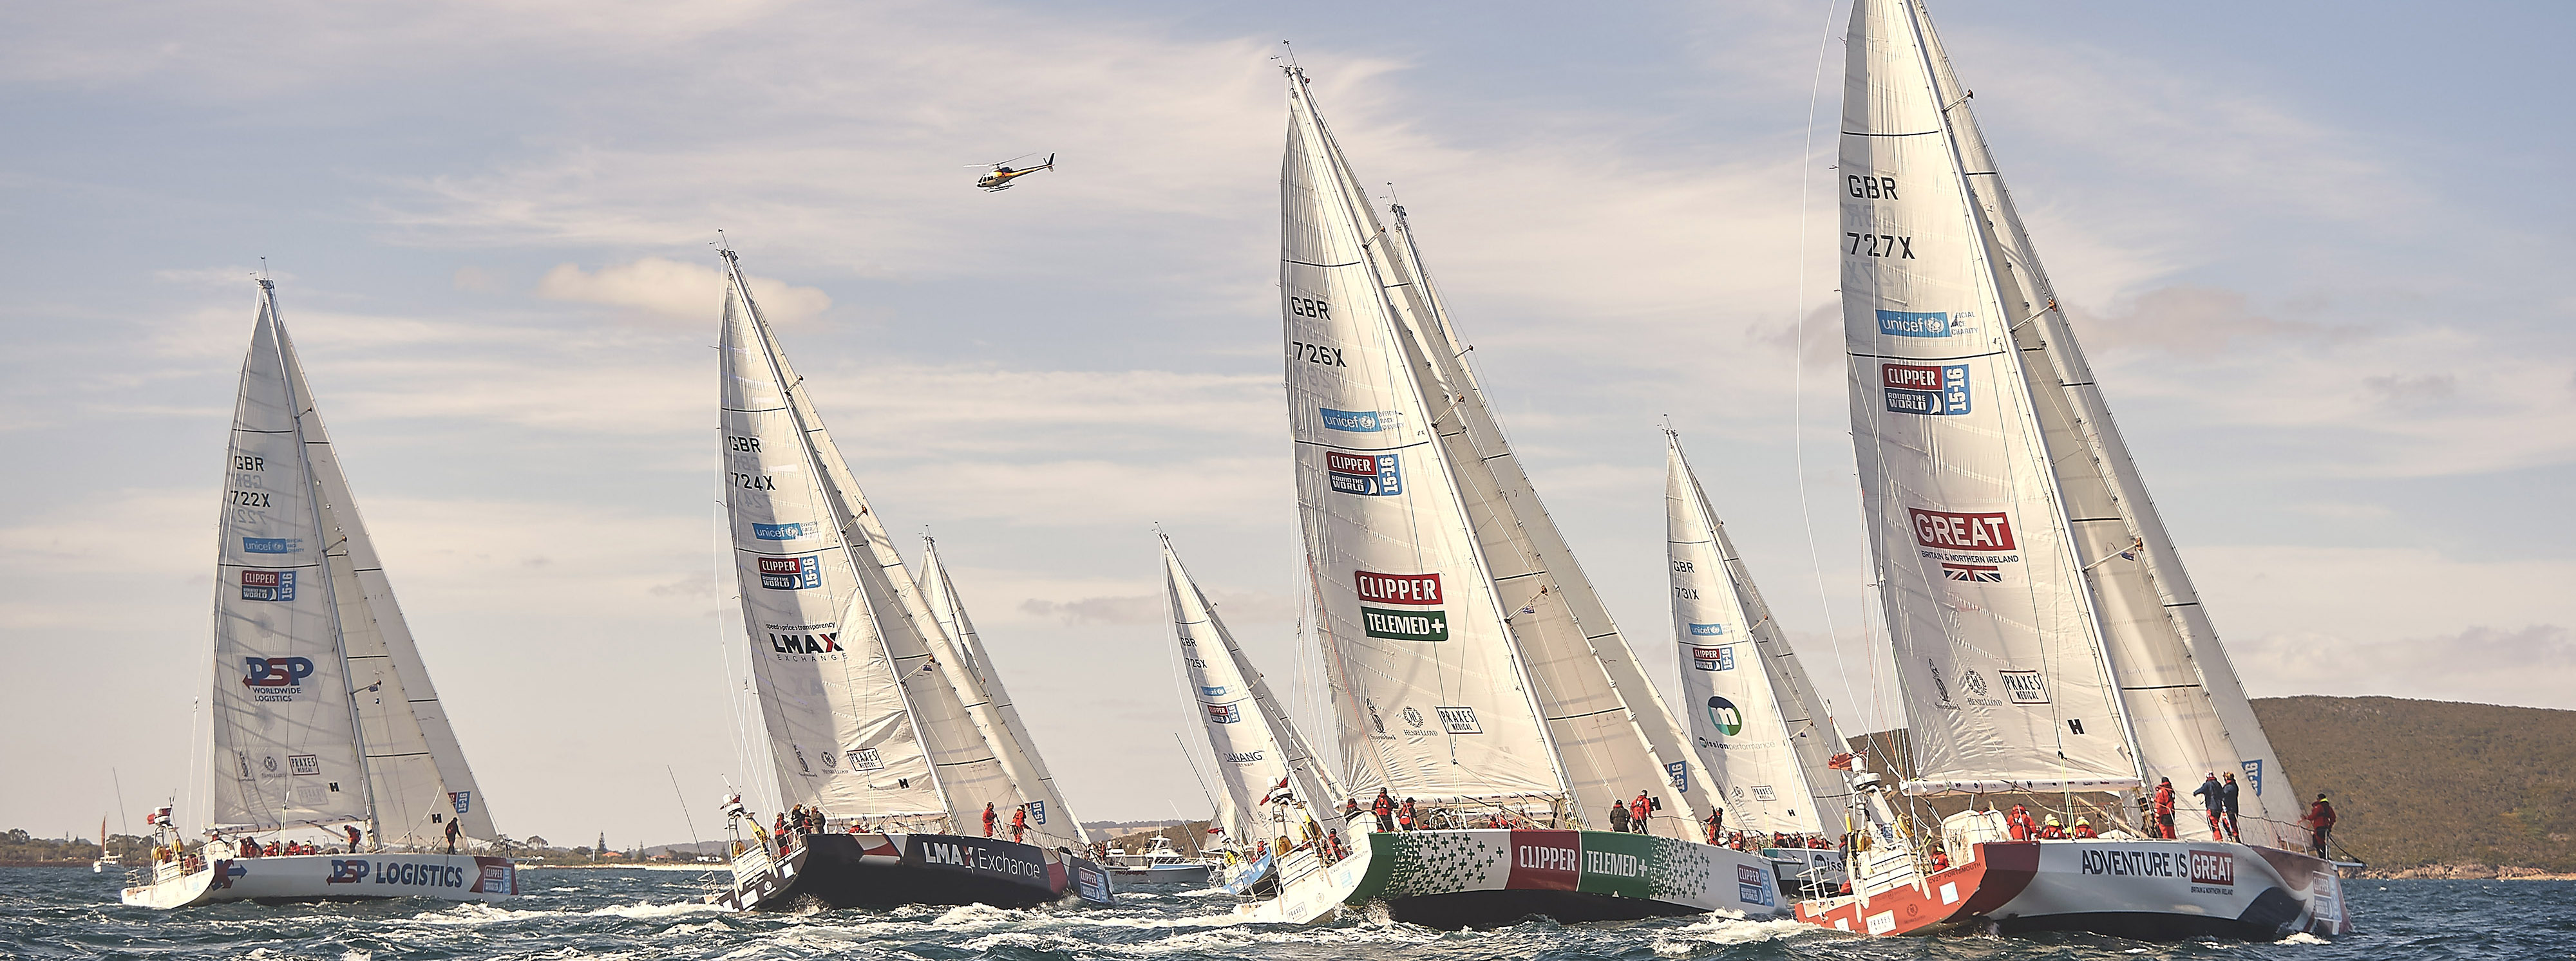 Race 4, The Elliot Brown Timekeeper Cup starts today